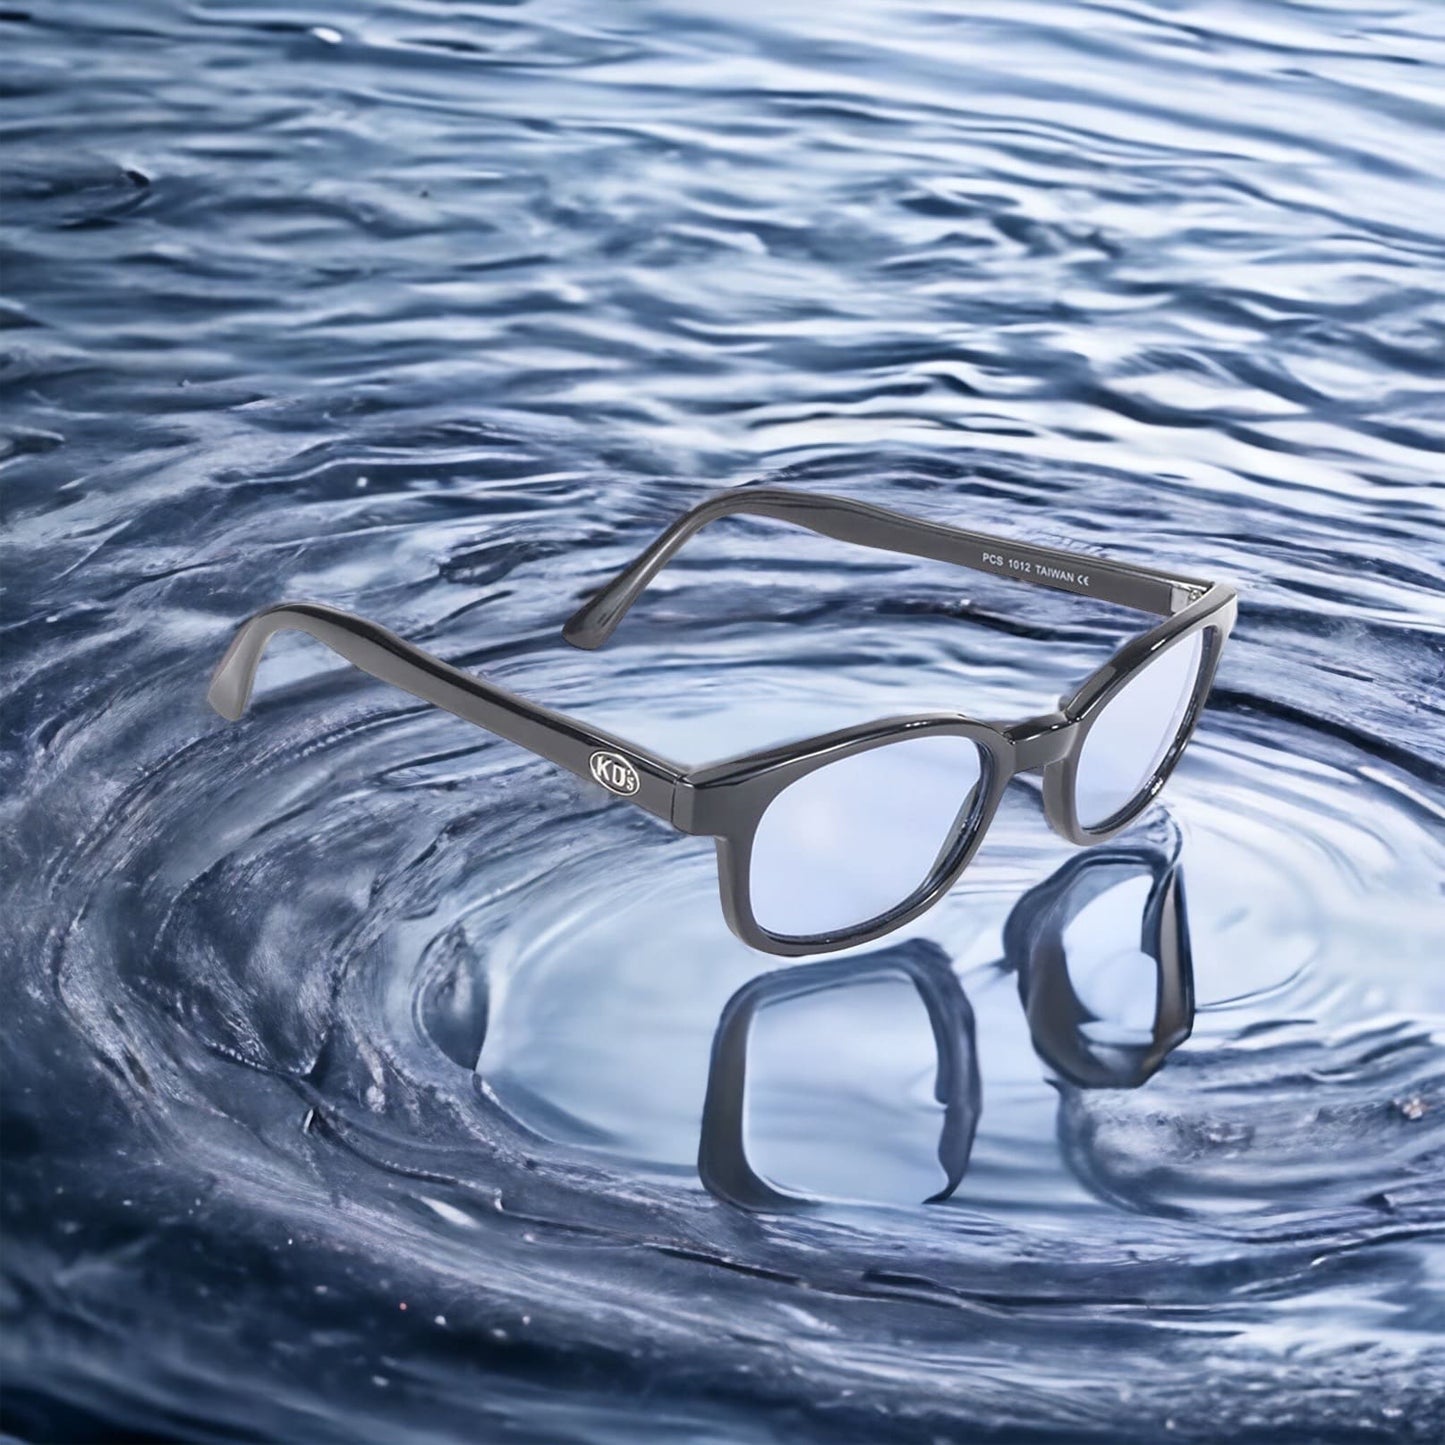 The X-KD's 1012 sunglasses with blue lenses and a distinct black frame placed on the water.